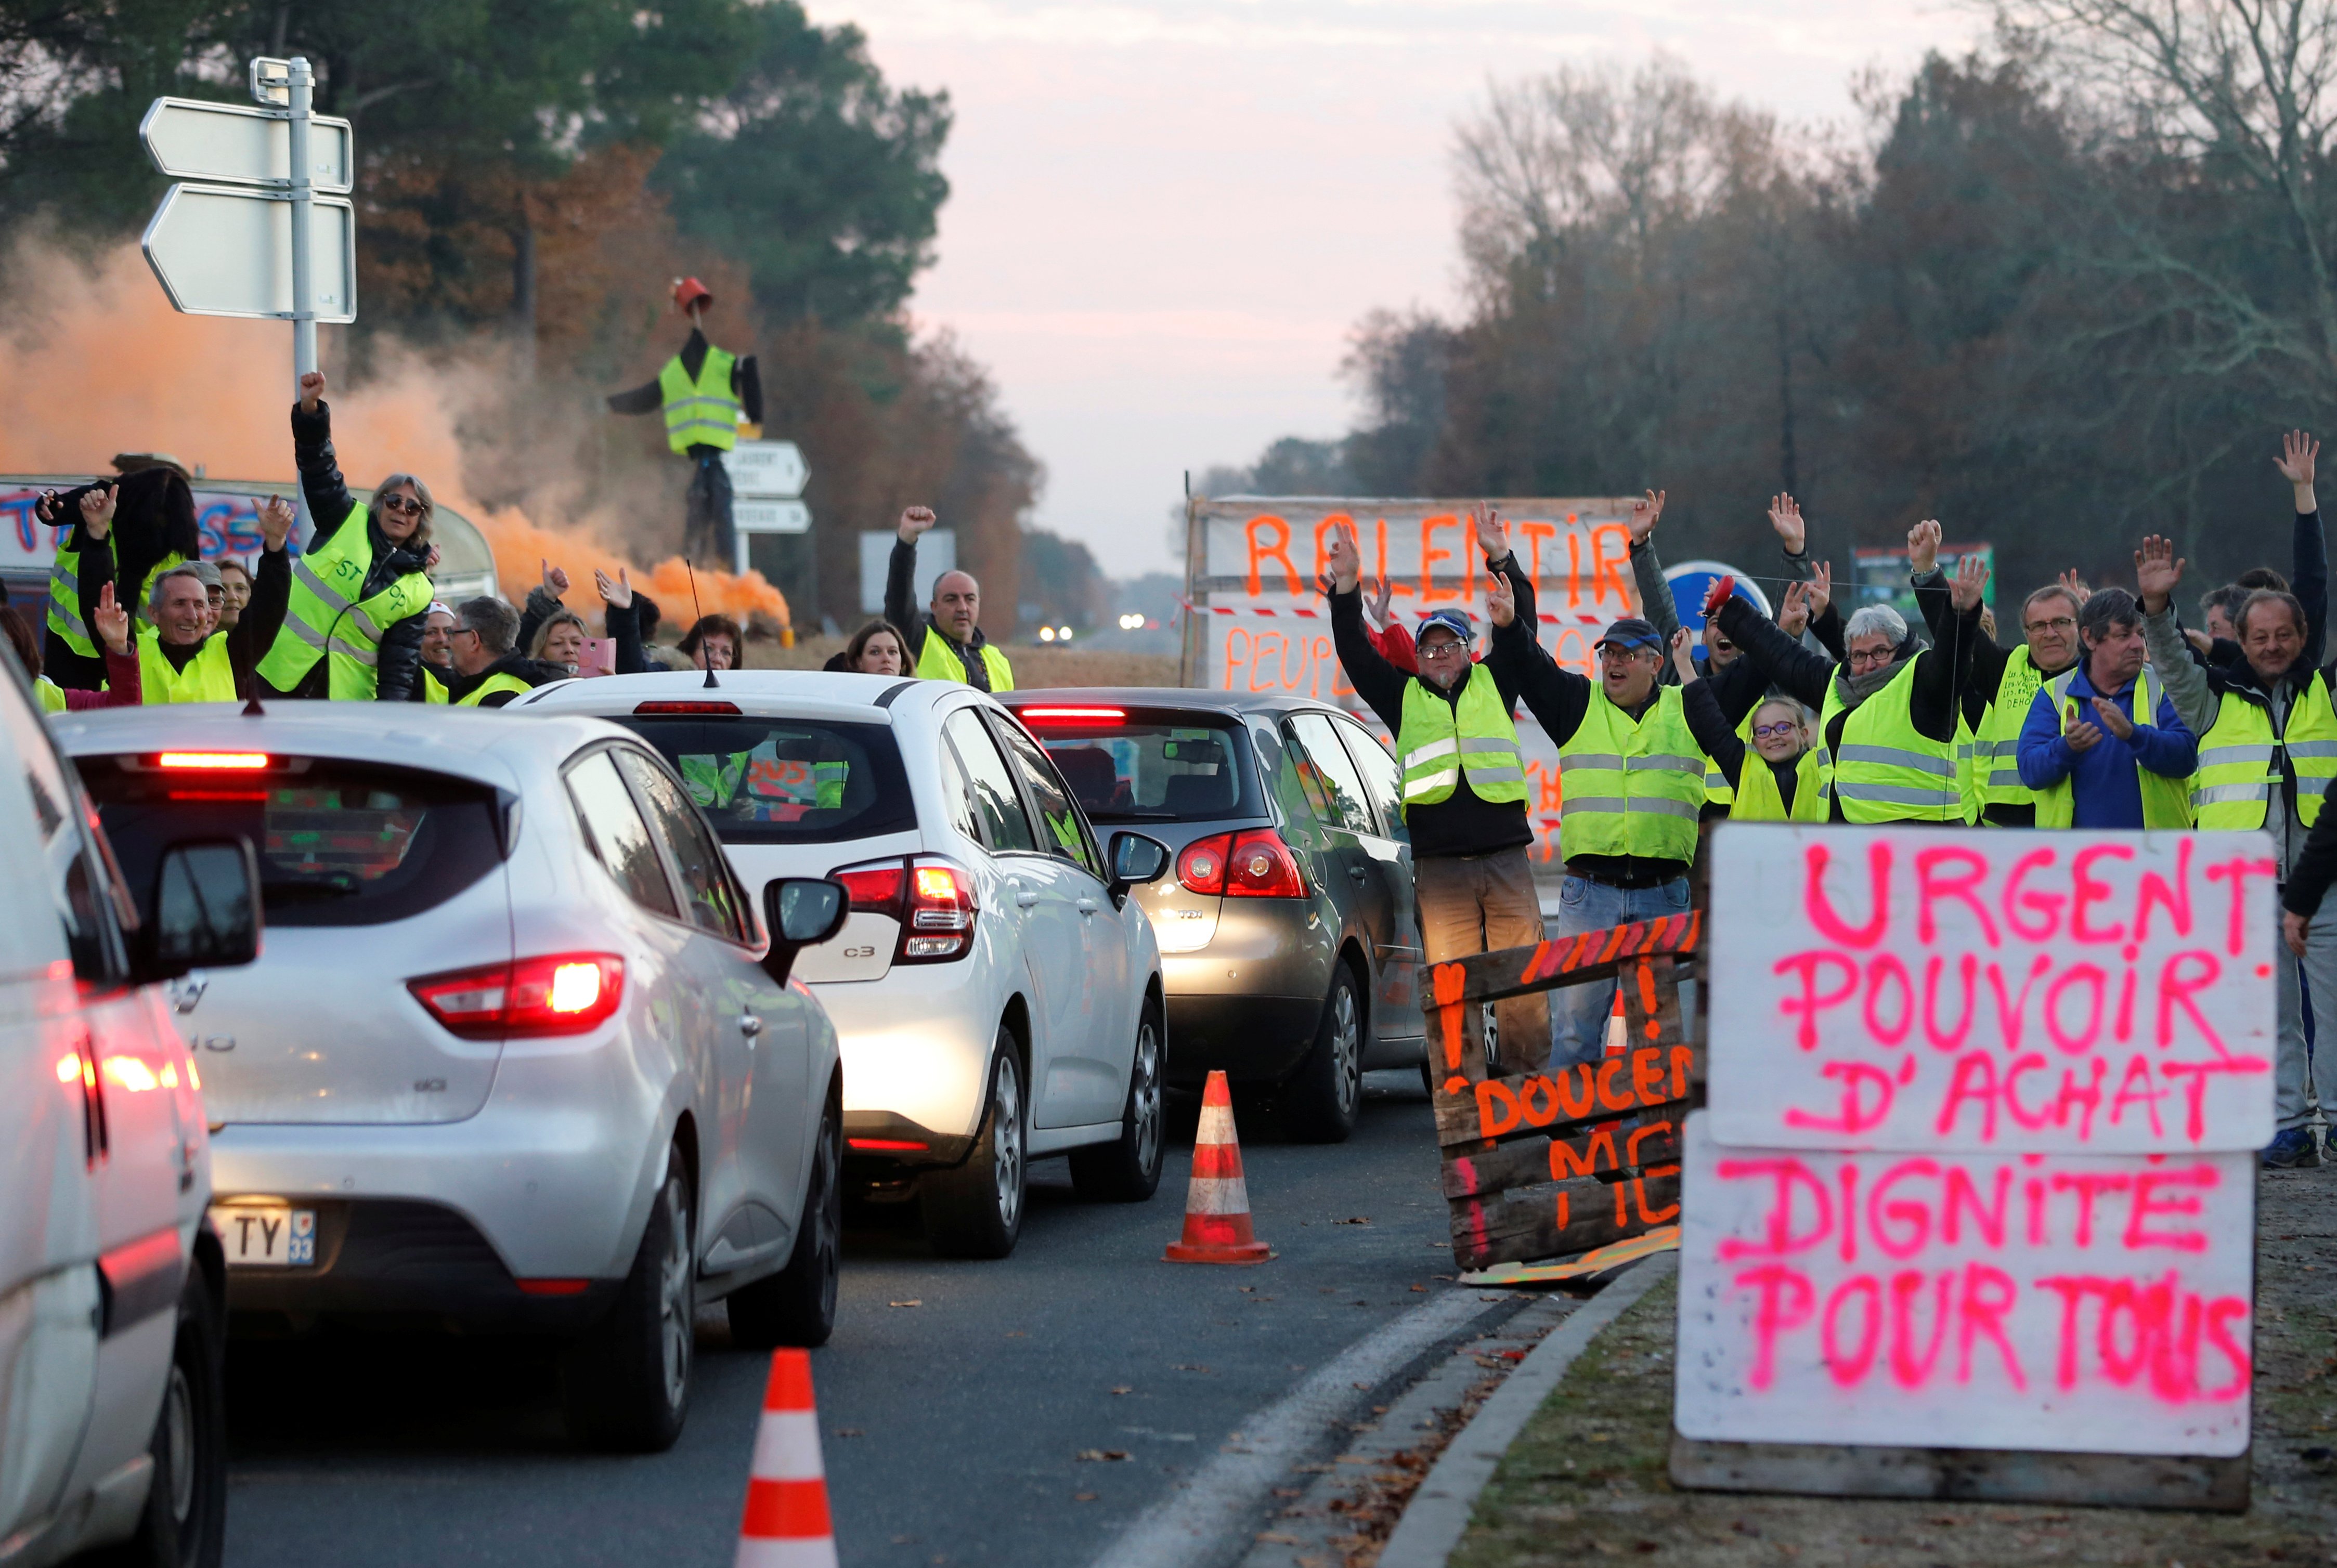 Protesters wearing yellow vests, the symbol of a French drivers' protest against higher diesel fuel prices, occupy a roundabout in Cissac-Medoc